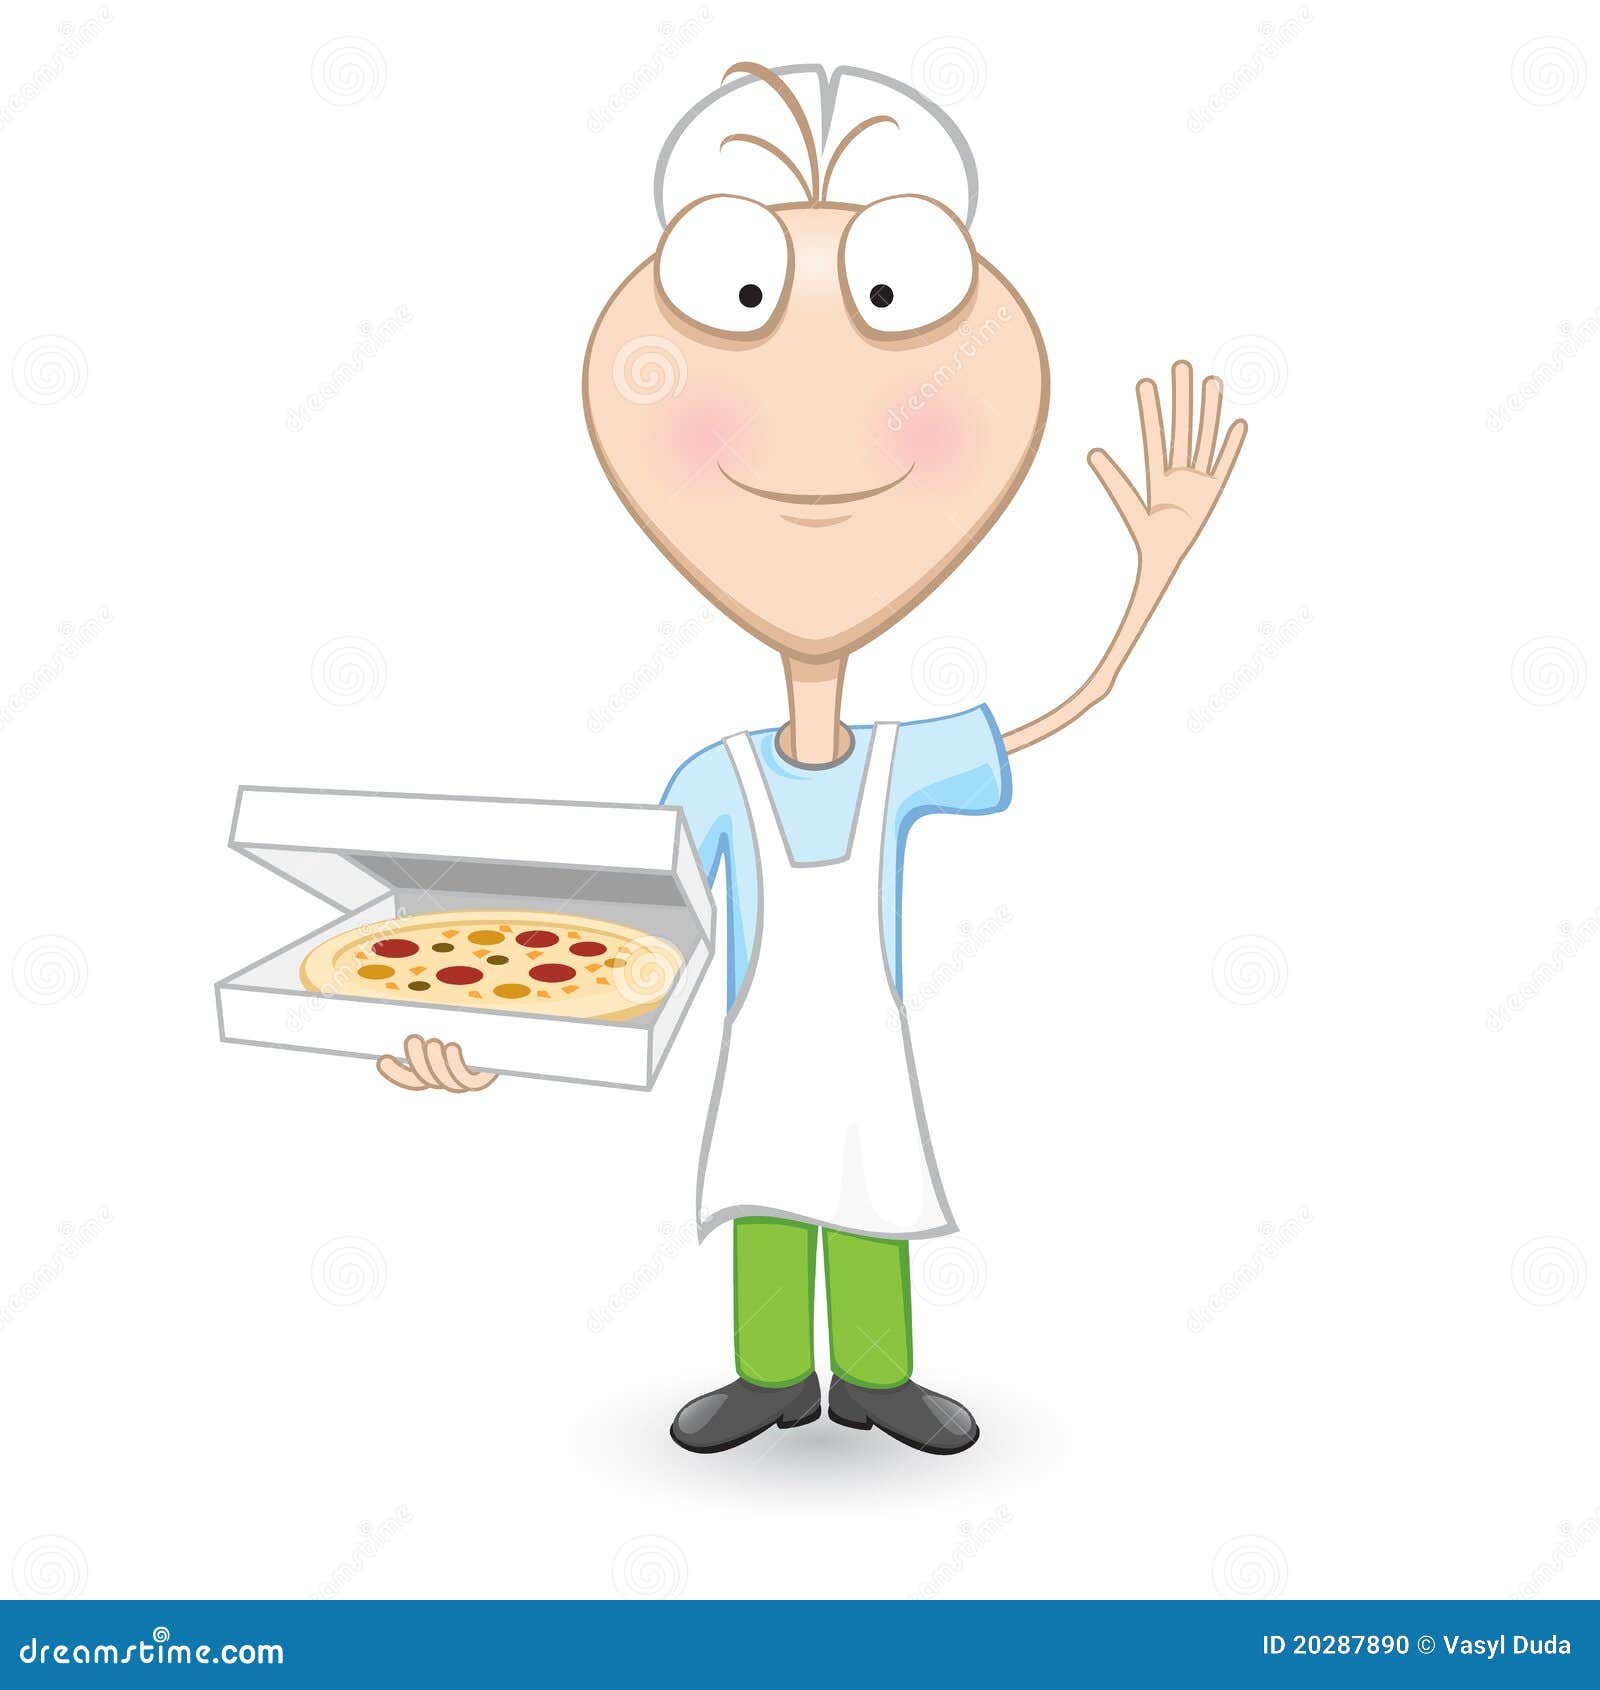 https://thumbs.dreamstime.com/z/boy-chef-showing-delicious-pizza-20287890.jpg